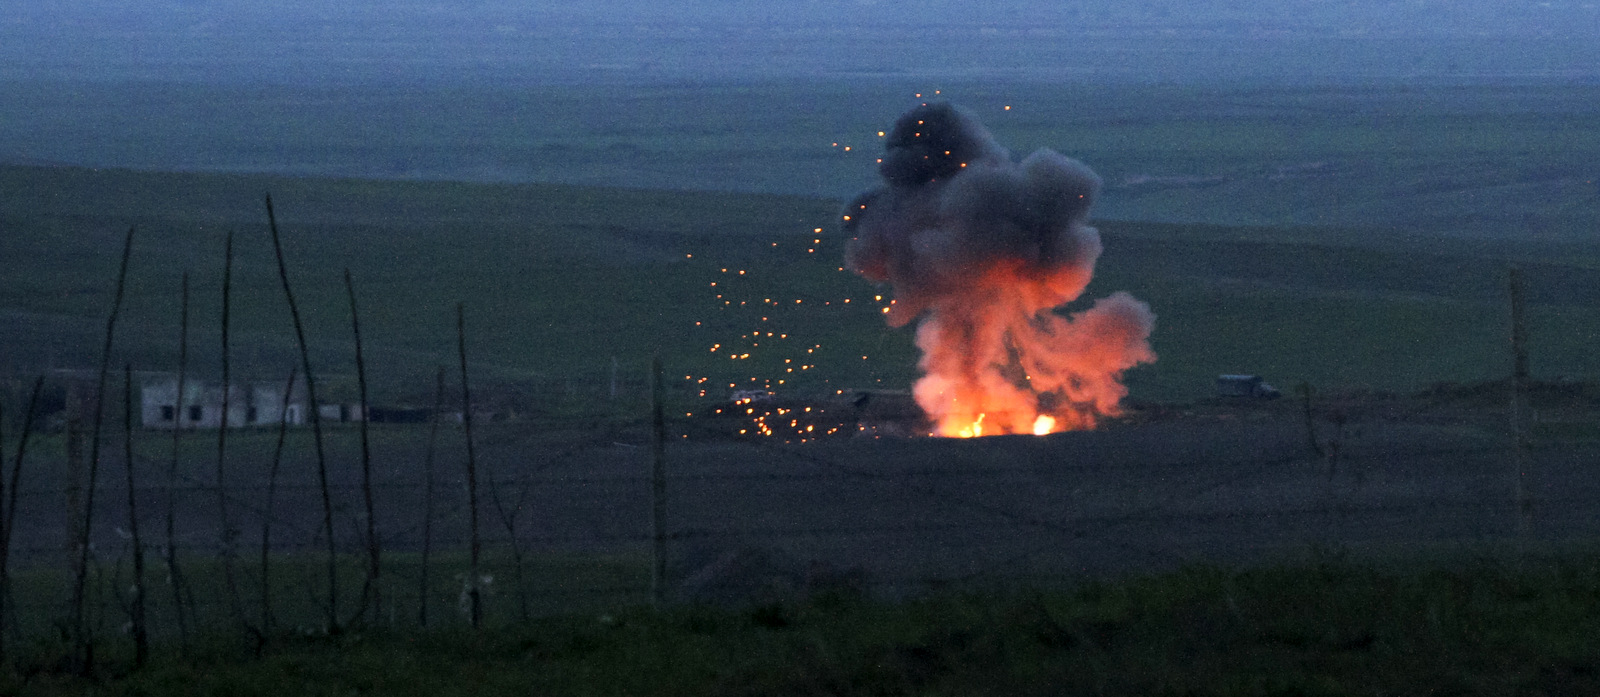 An explosion of a downed Azerbaijani drone in the Nagorno-Karabakh, Azerbaijan, April 4, 2016. The Nagorno-Karabakh military said it downed several Azerbaijani drones since fighting around the region erupted. (Vahram Baghdasaryan/Photolure)